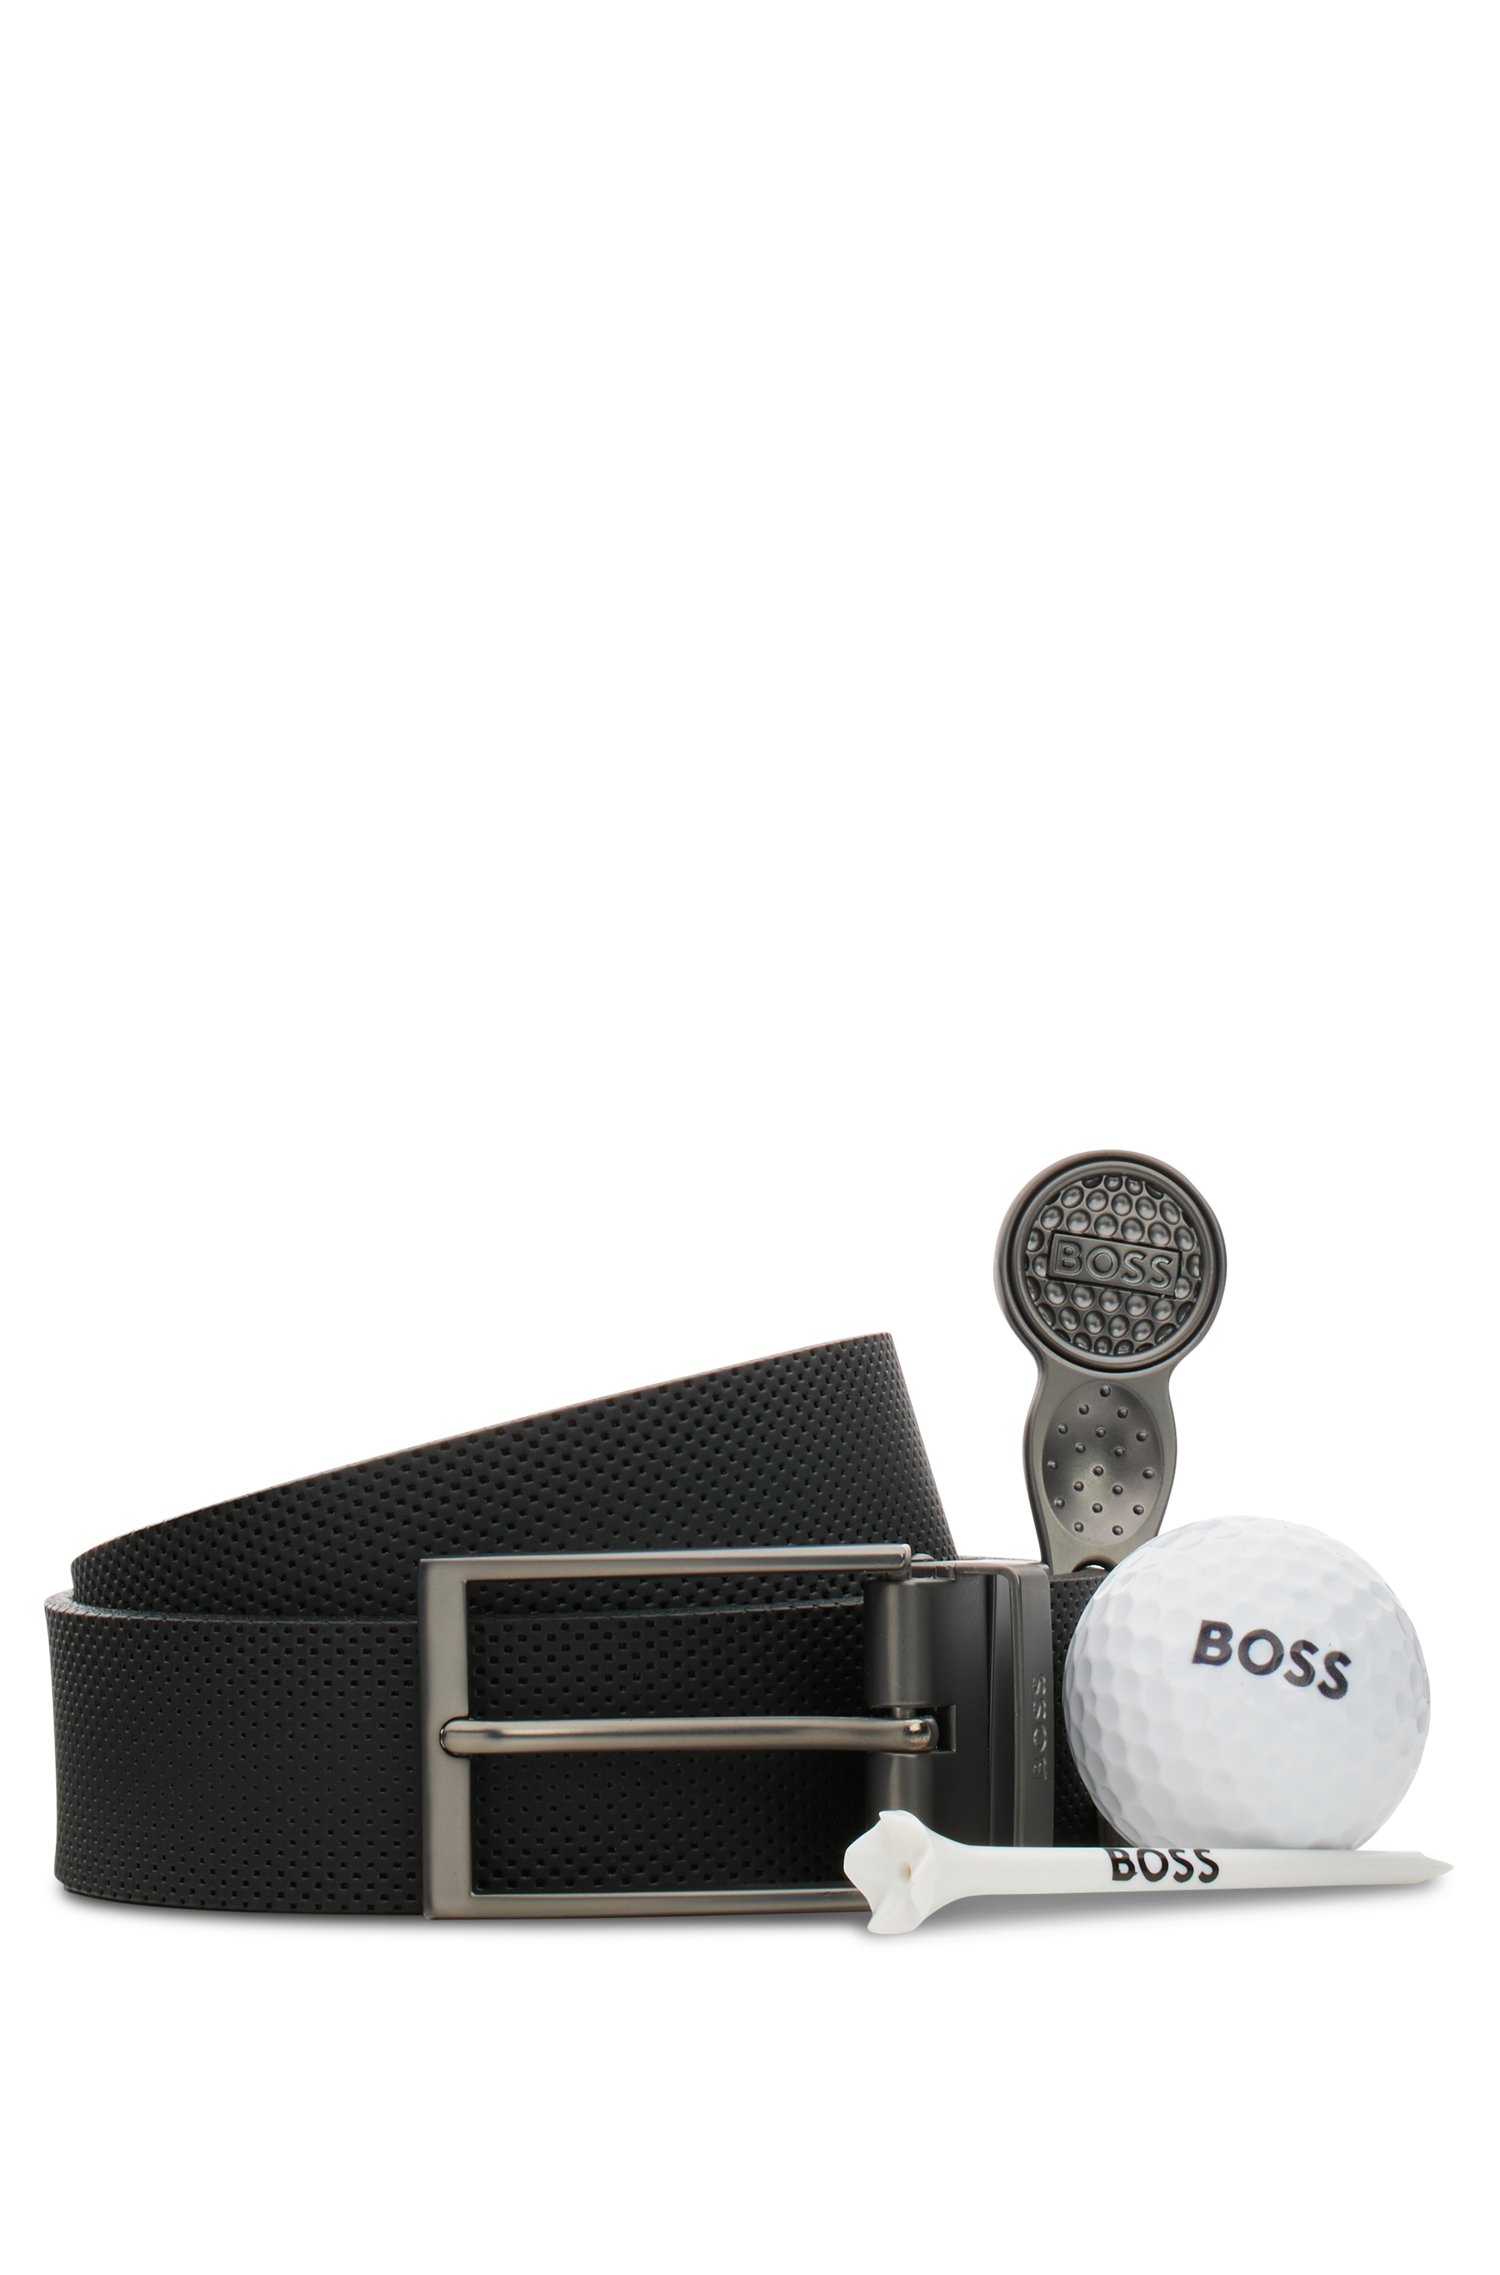 Reversible Italian-leather belt and golf accessories gift set